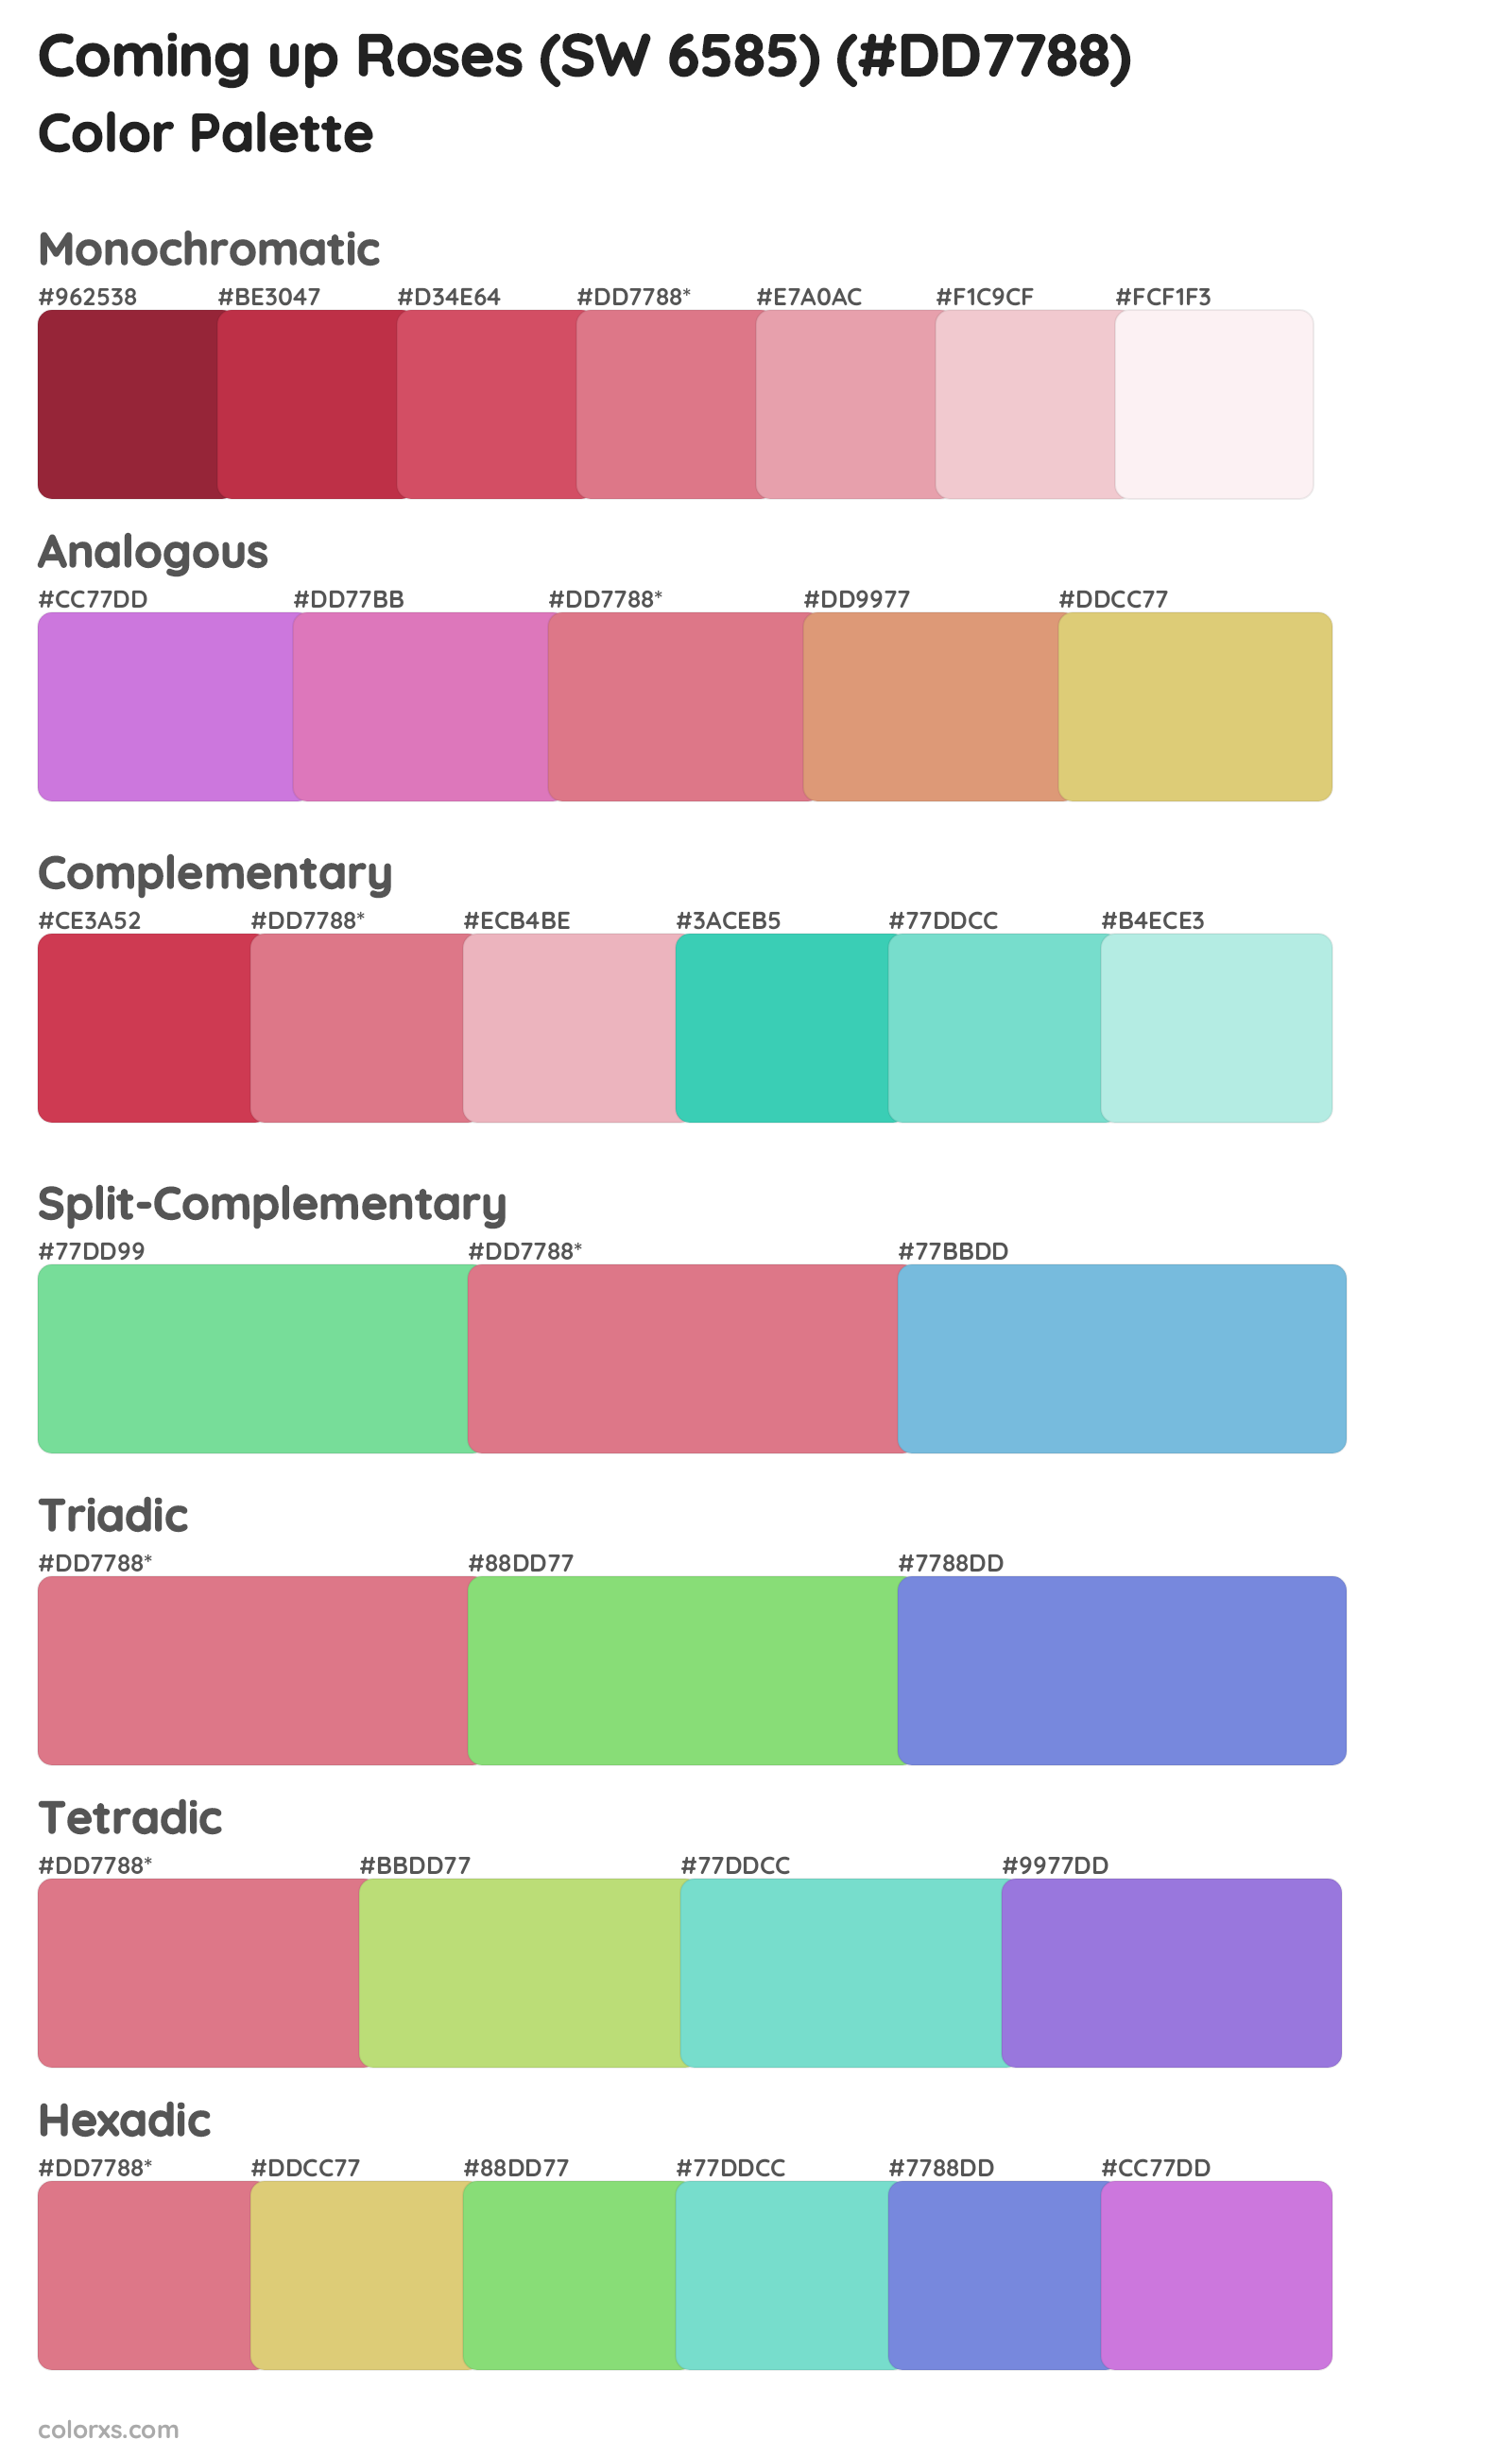 Coming up Roses (SW 6585) Color Scheme Palettes